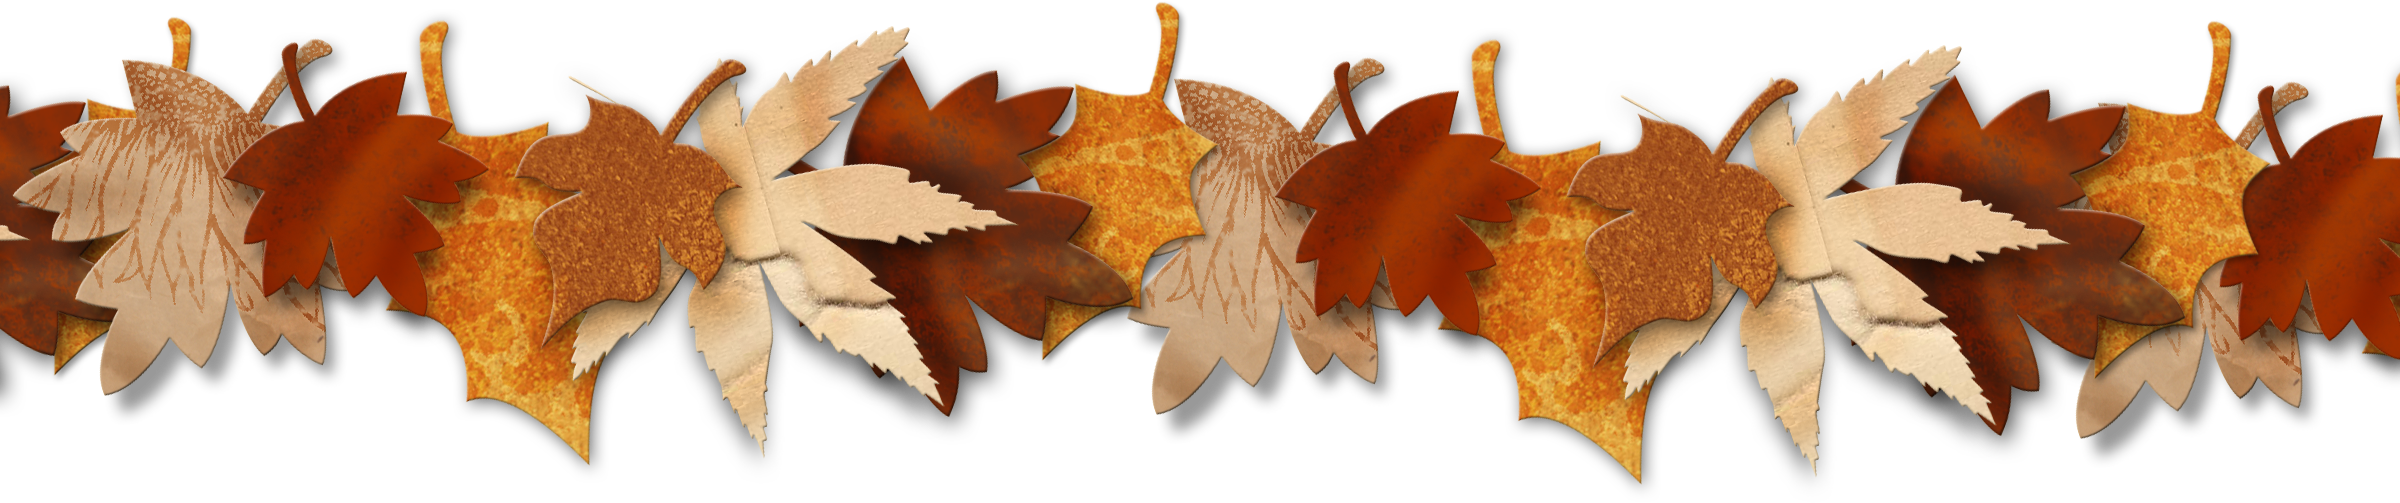 Displaying 14  Images For   Autumn Leaves Png   